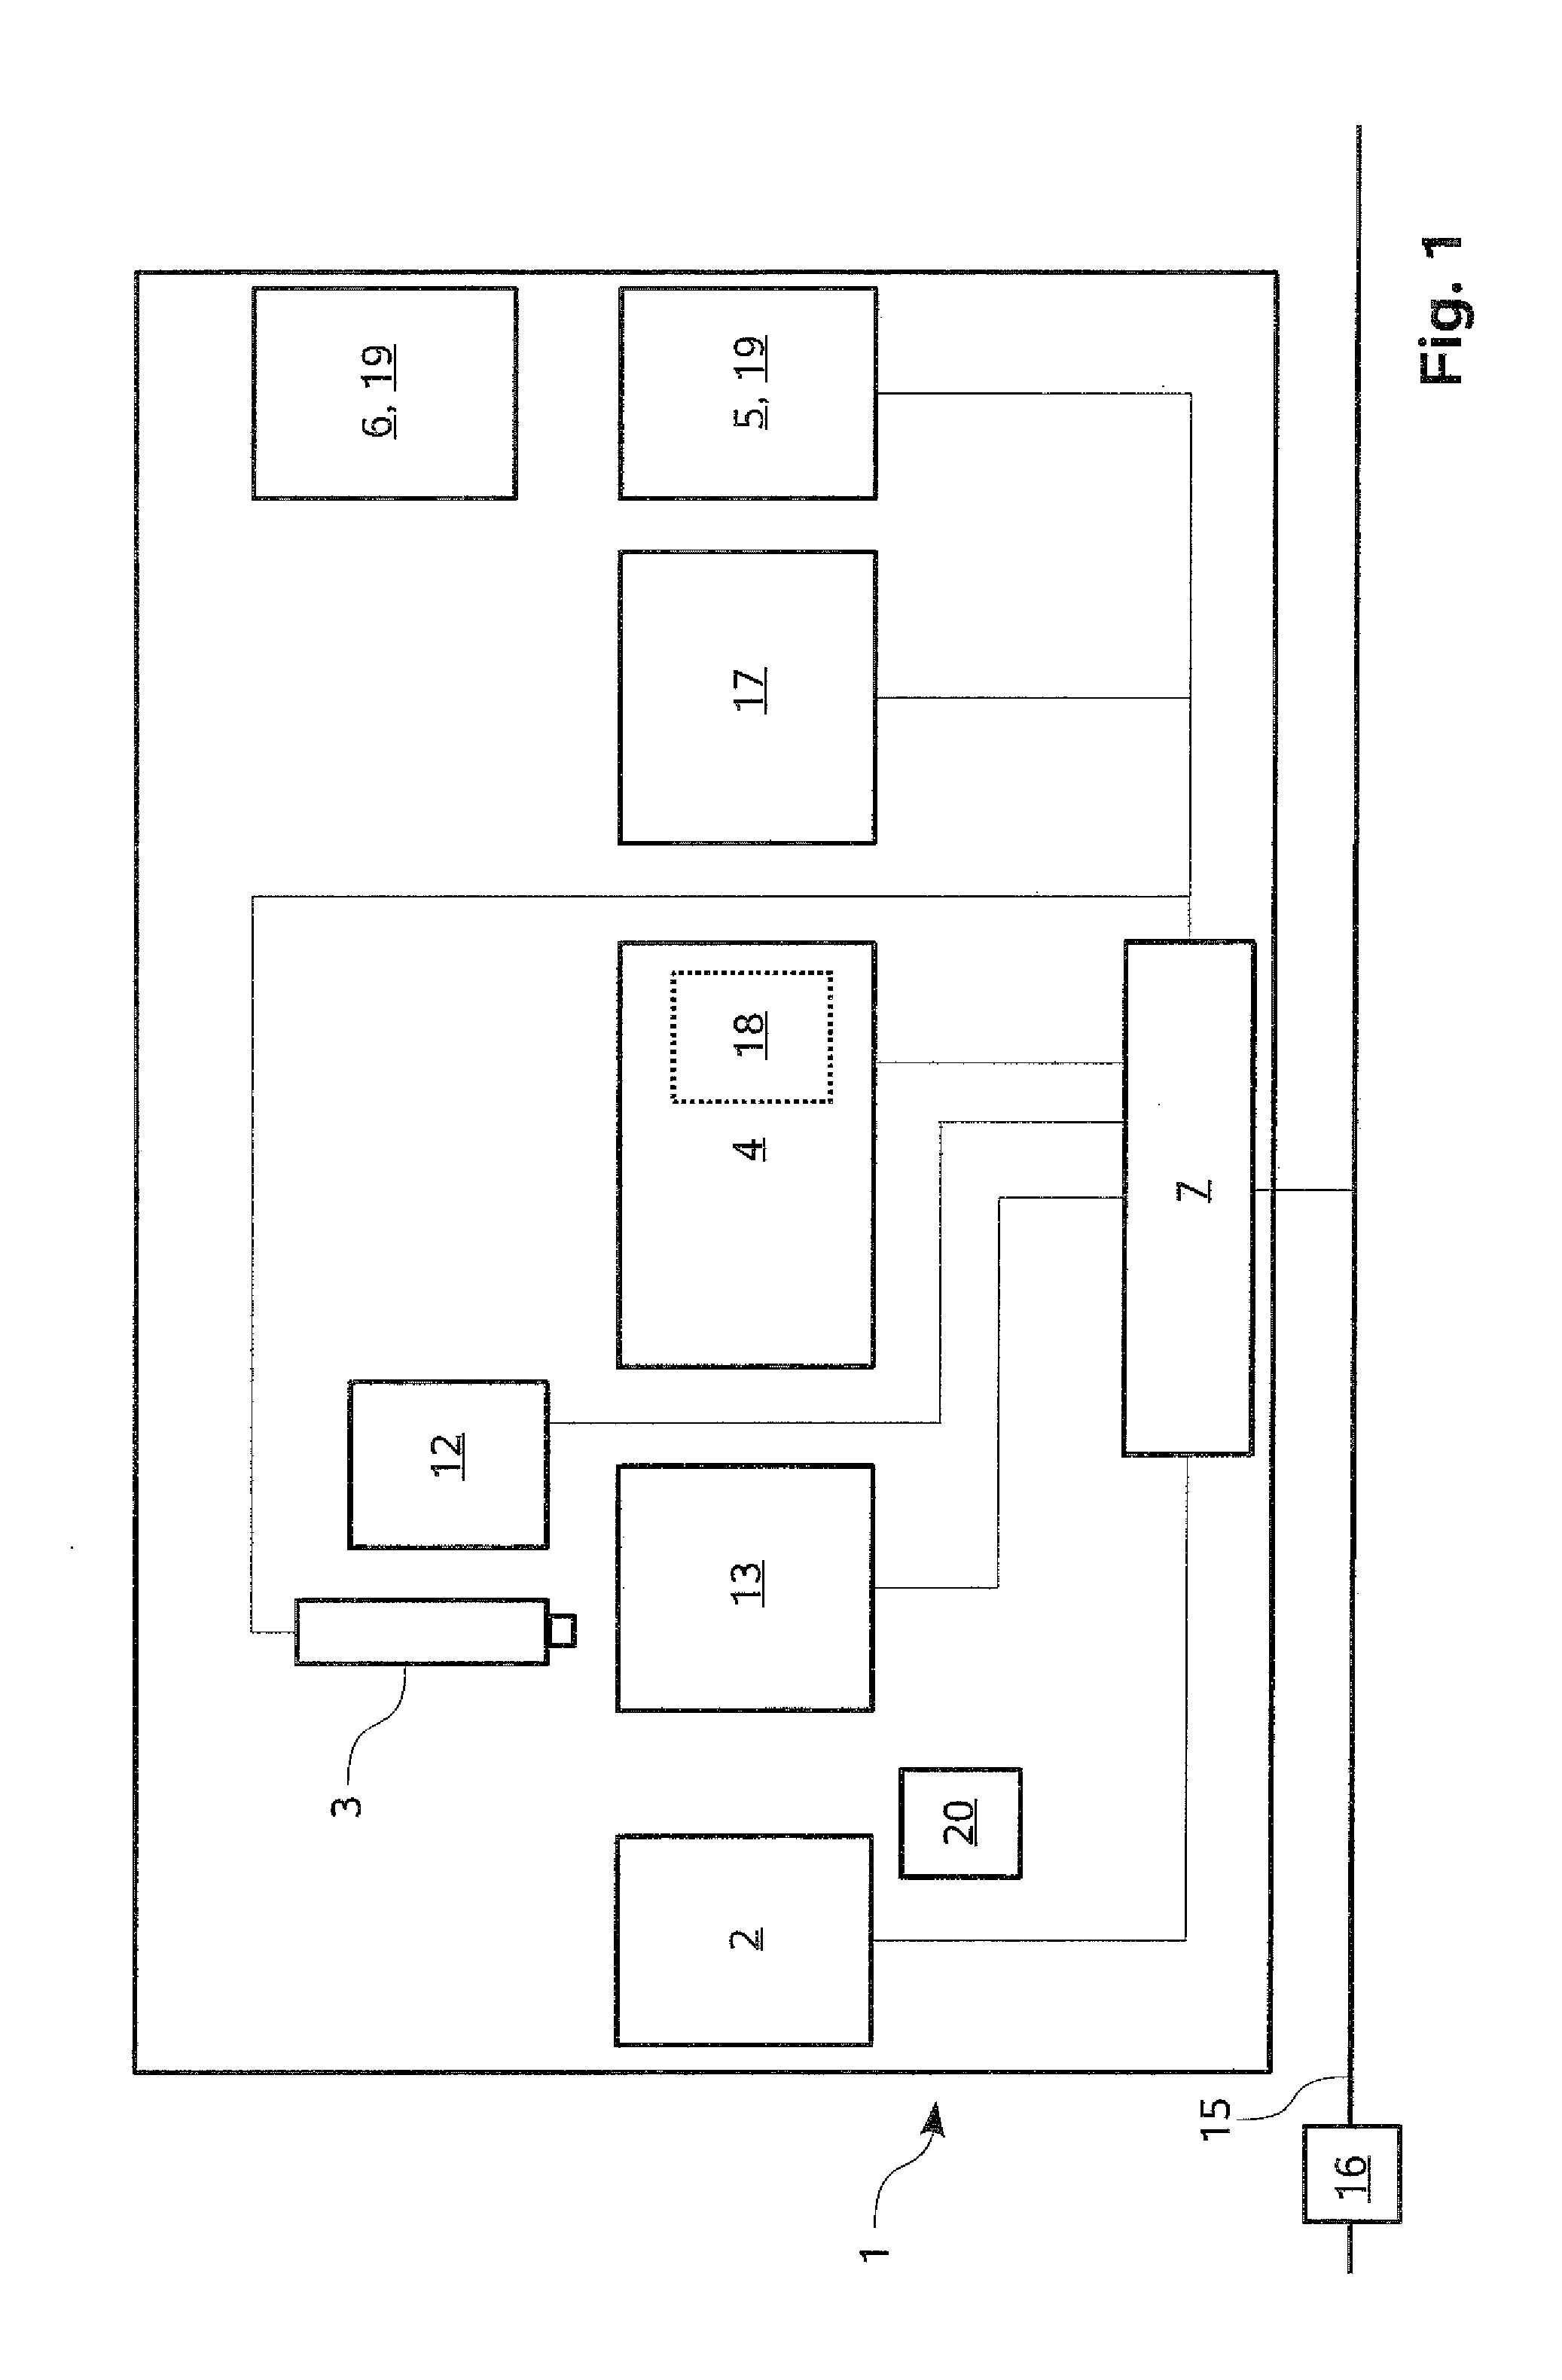 Tissue embedding apparatus, and method for operating a tissue embedding apparatus